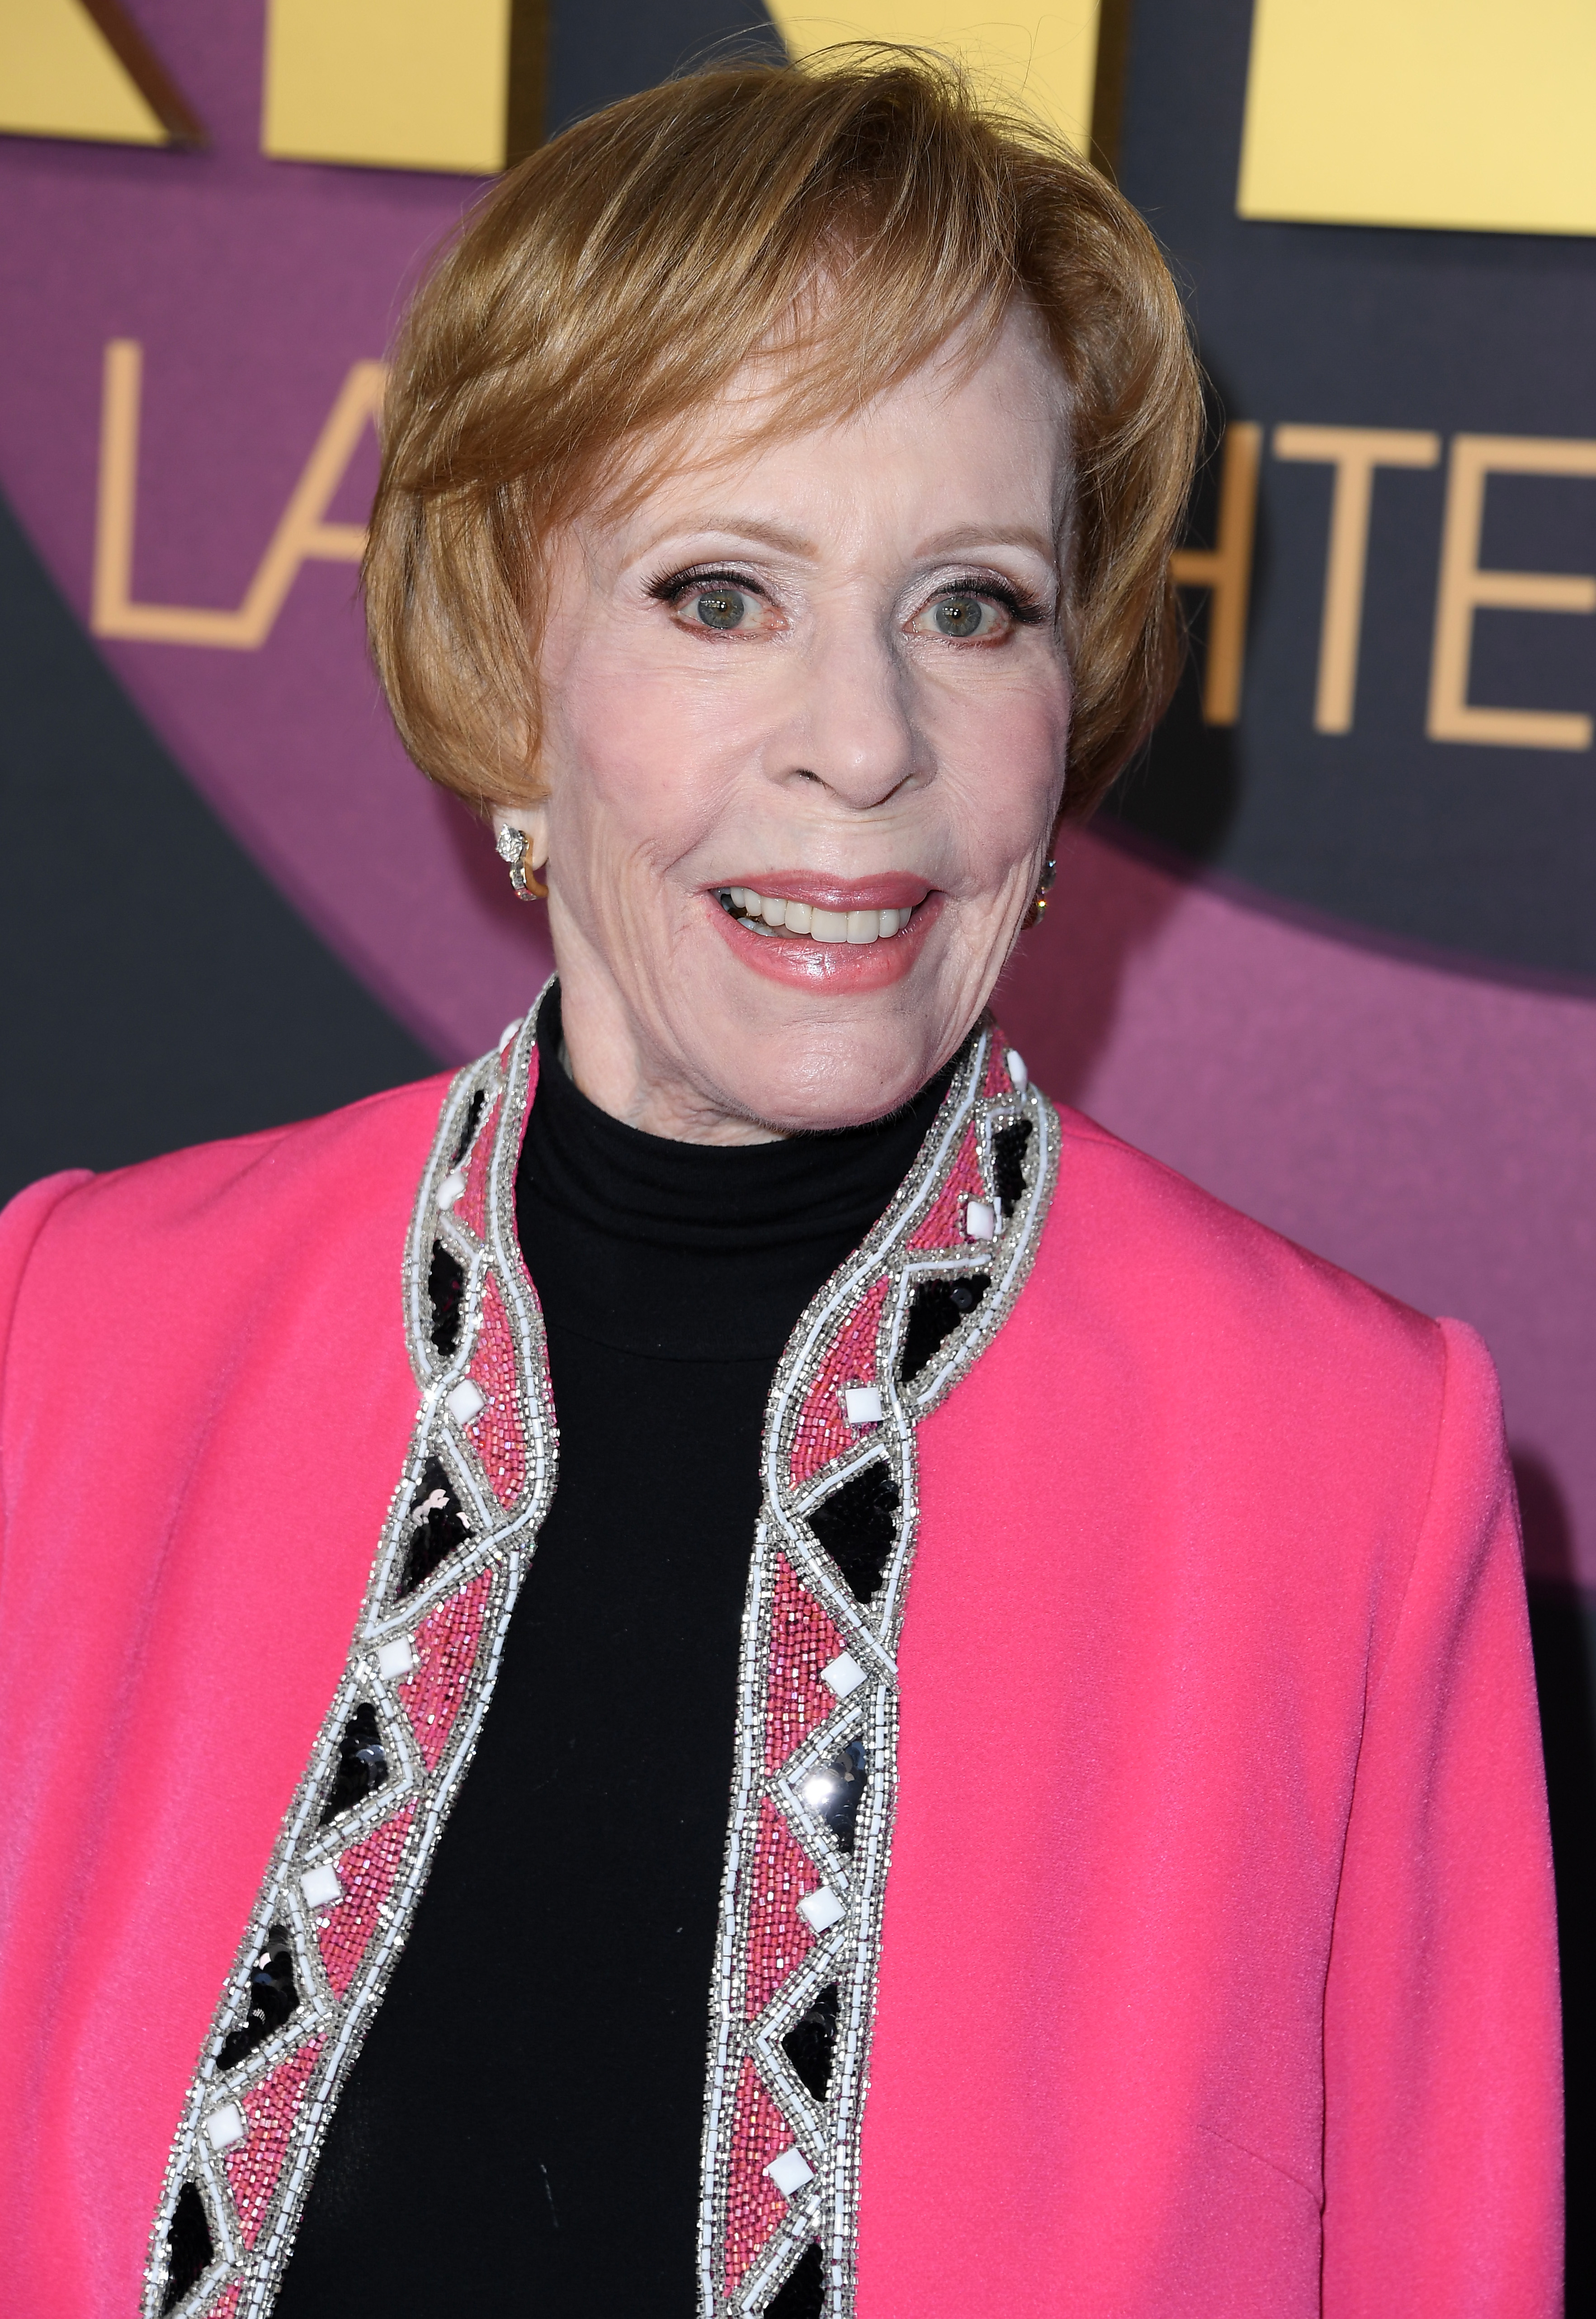 Carol Burnett at her NBC birthday special in Los Angeles on March 2, 2023 | Source: Getty Images